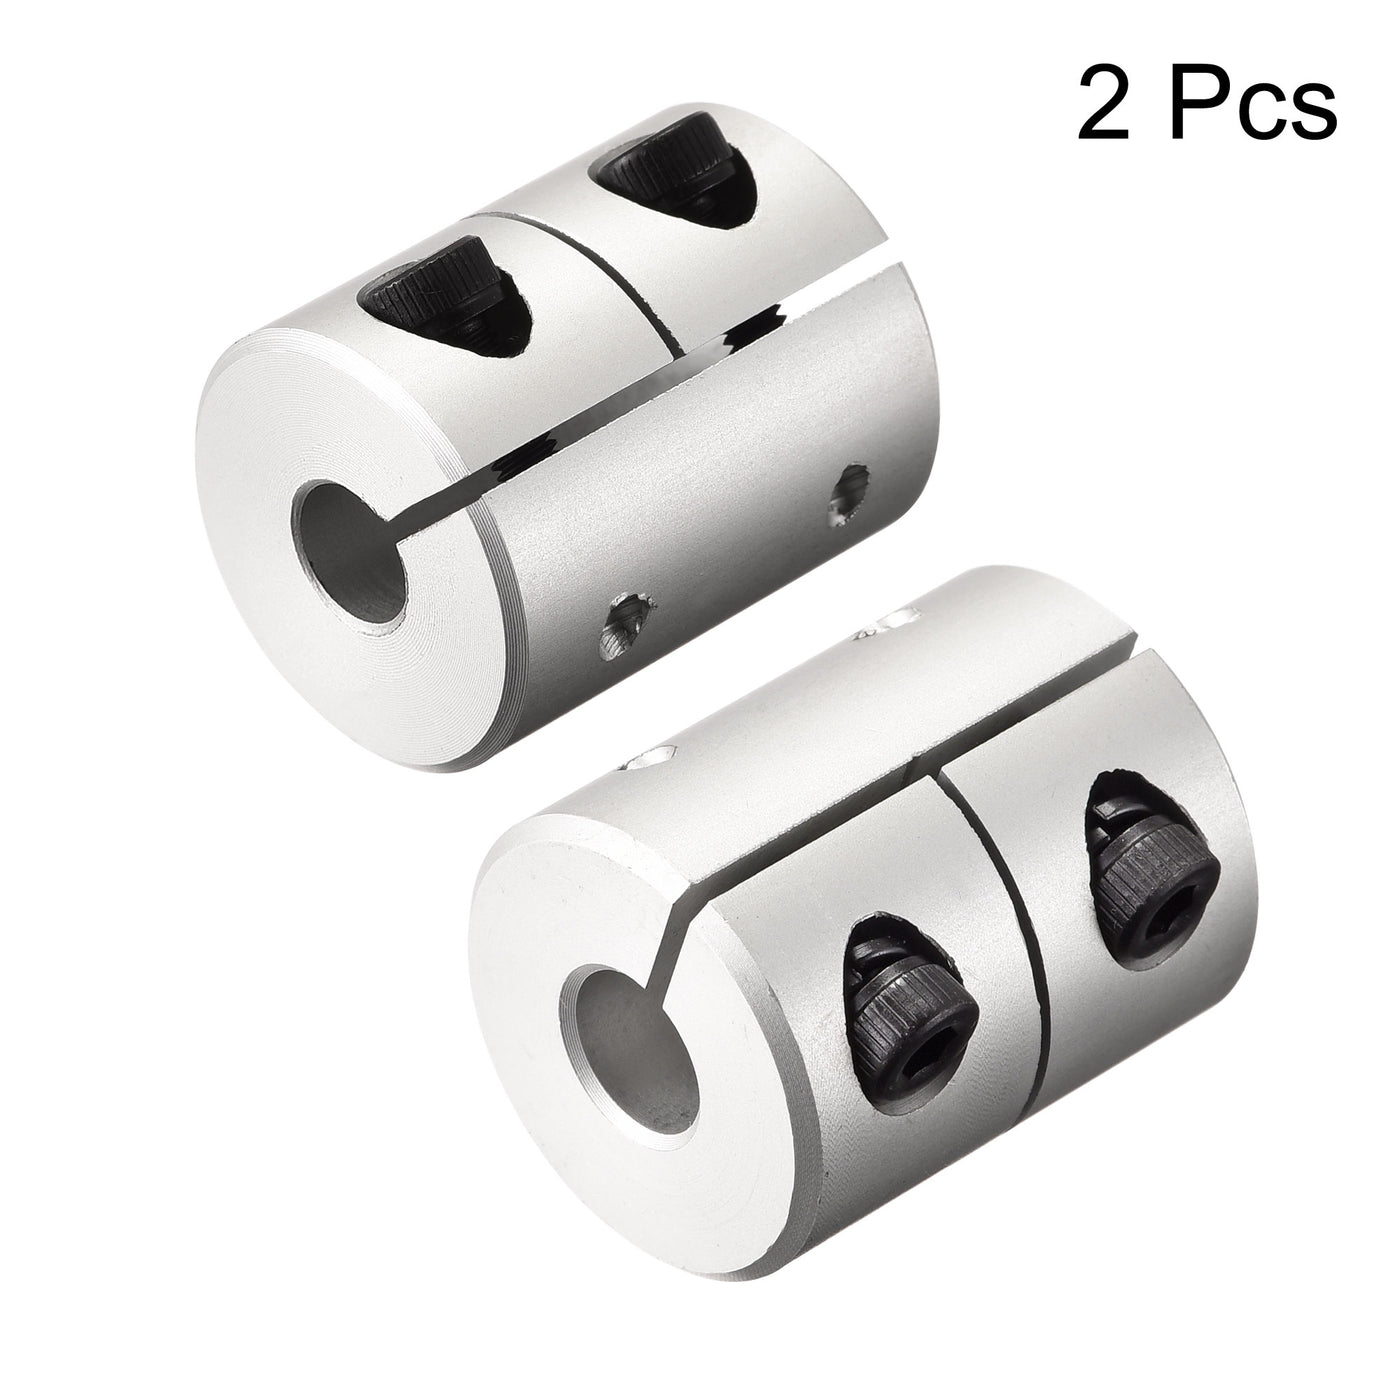 Uxcell Uxcell 2pcs 6mm to 6mm Shaft Coupling 25mmx20mm Coupler Aluminum Alloy Joint Motor for 3D Printer CNC Machine DIY Encoder